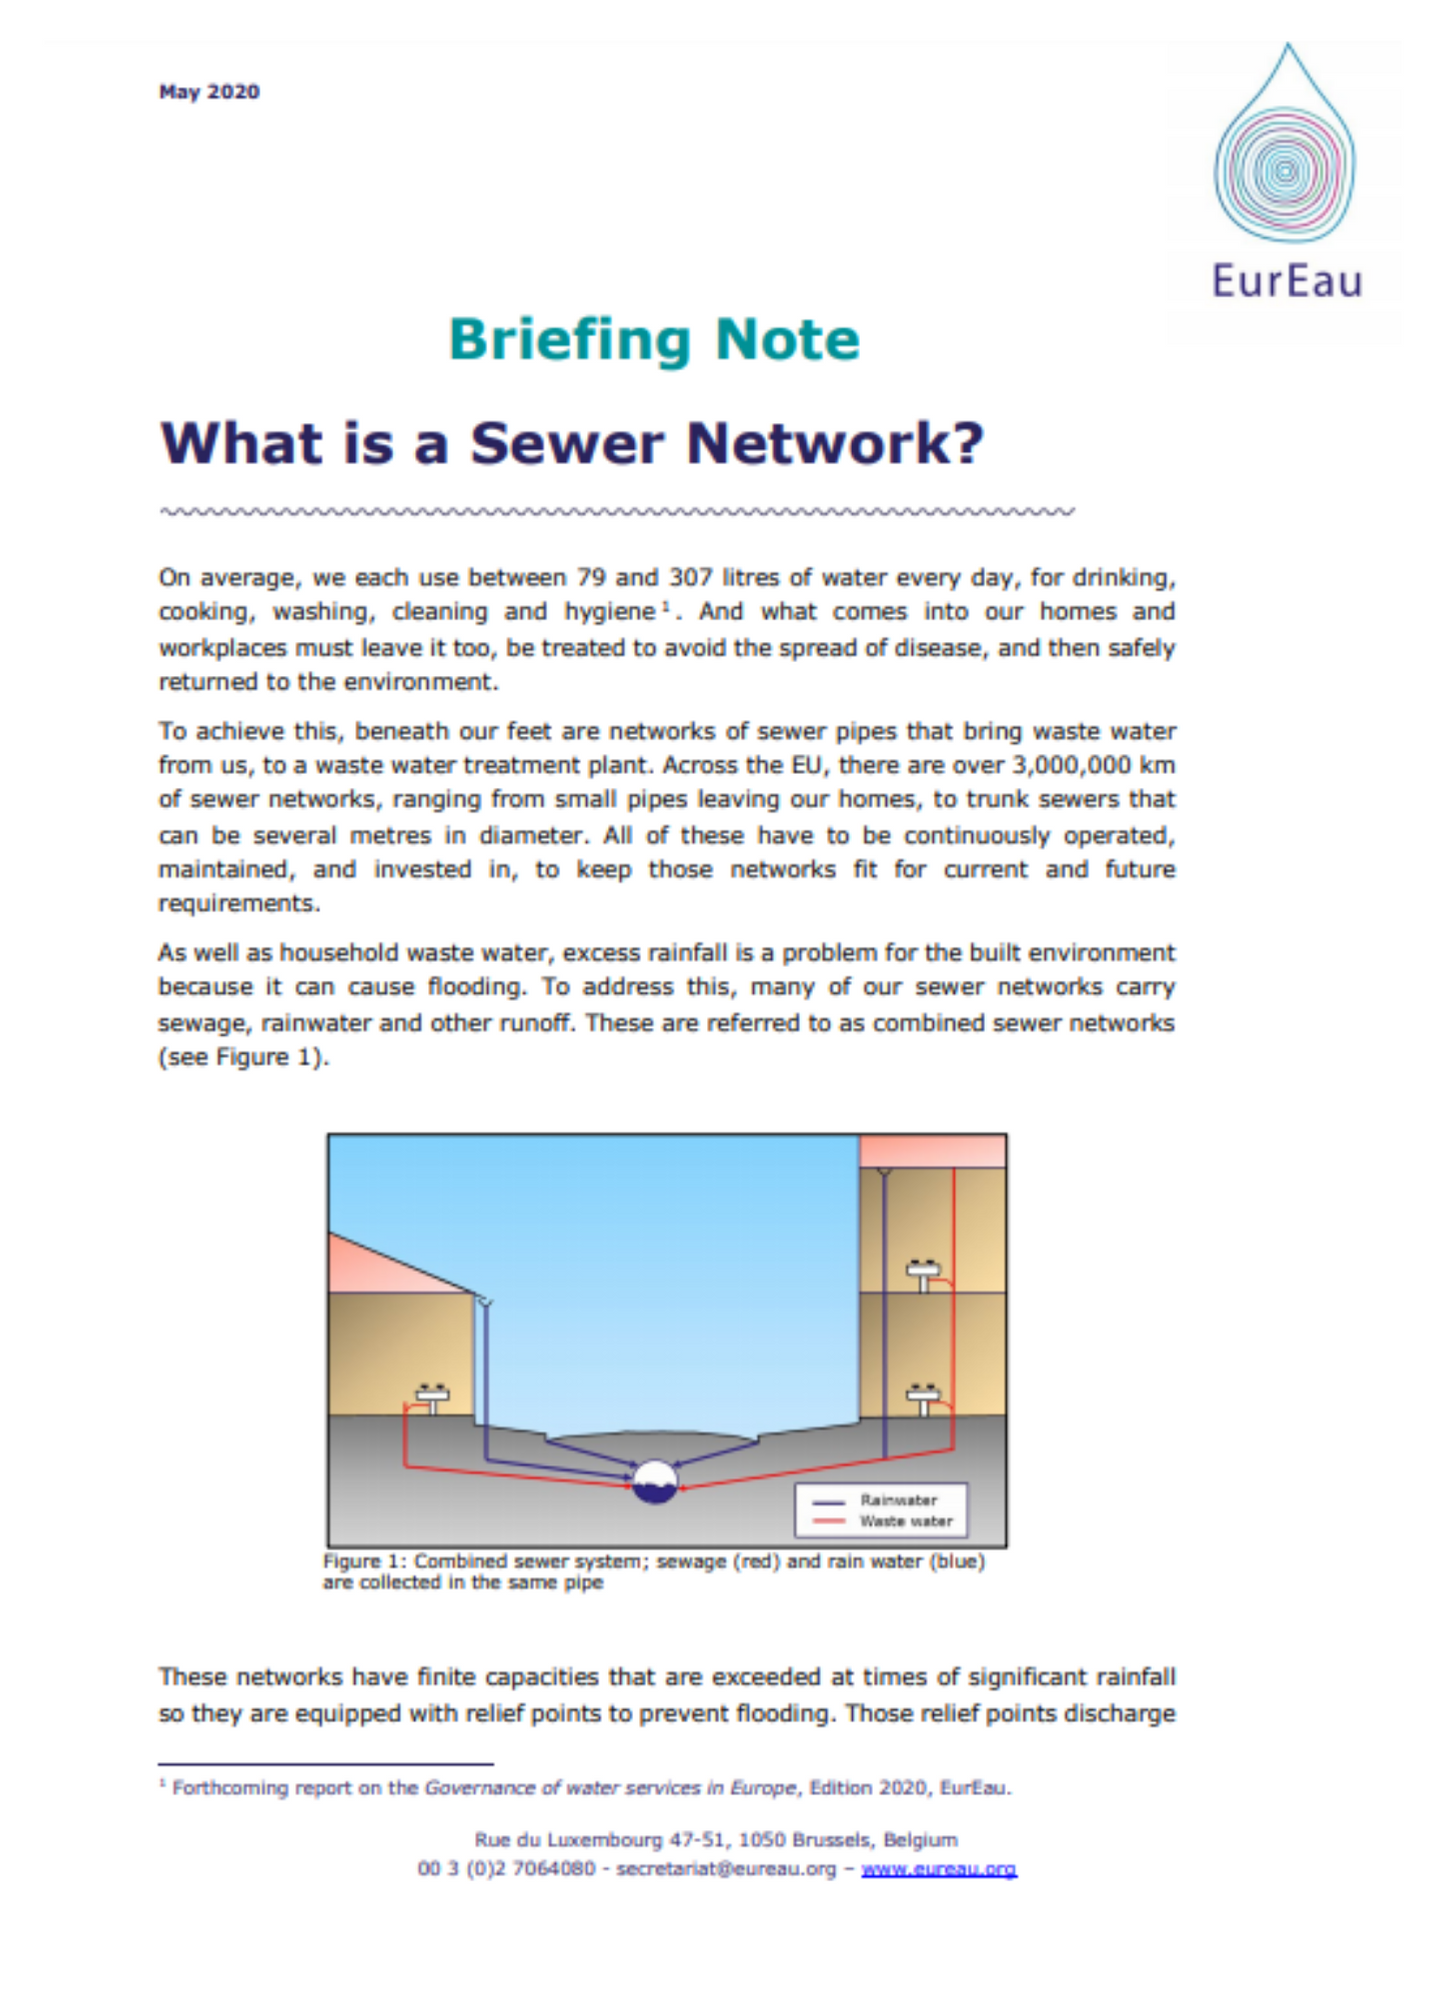 Briefing note on what is a sewer network